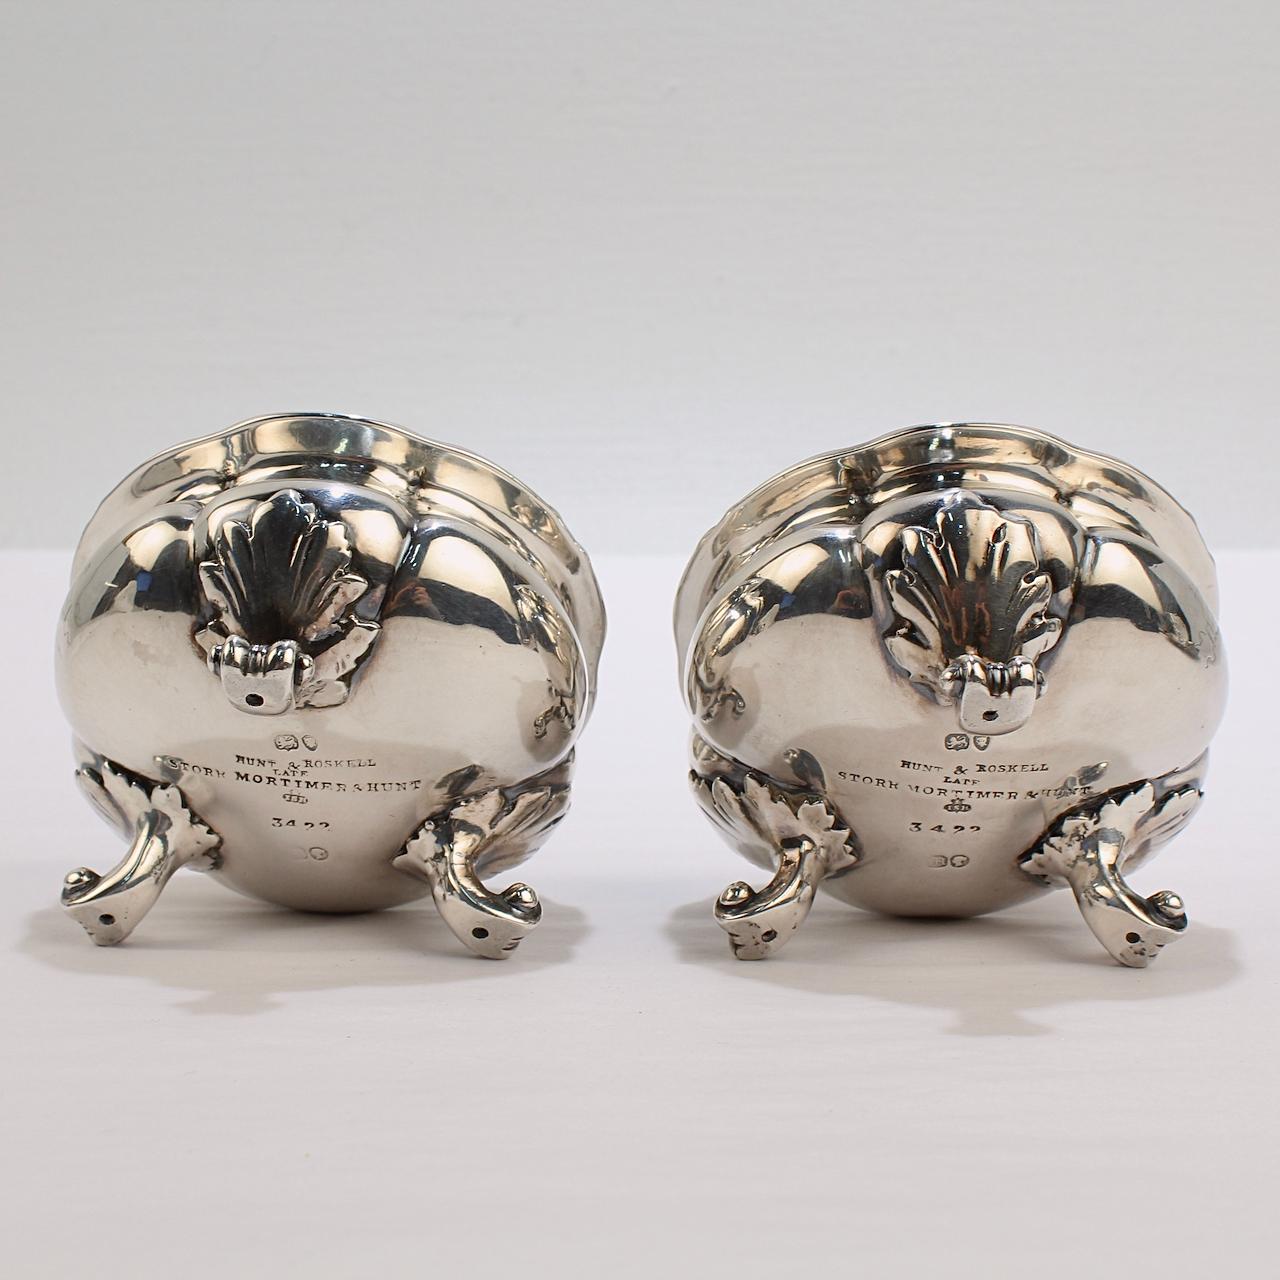 Pair of Crested English Victorian Sterling Silver Salt Cellars by Hunt & Roskell For Sale 1